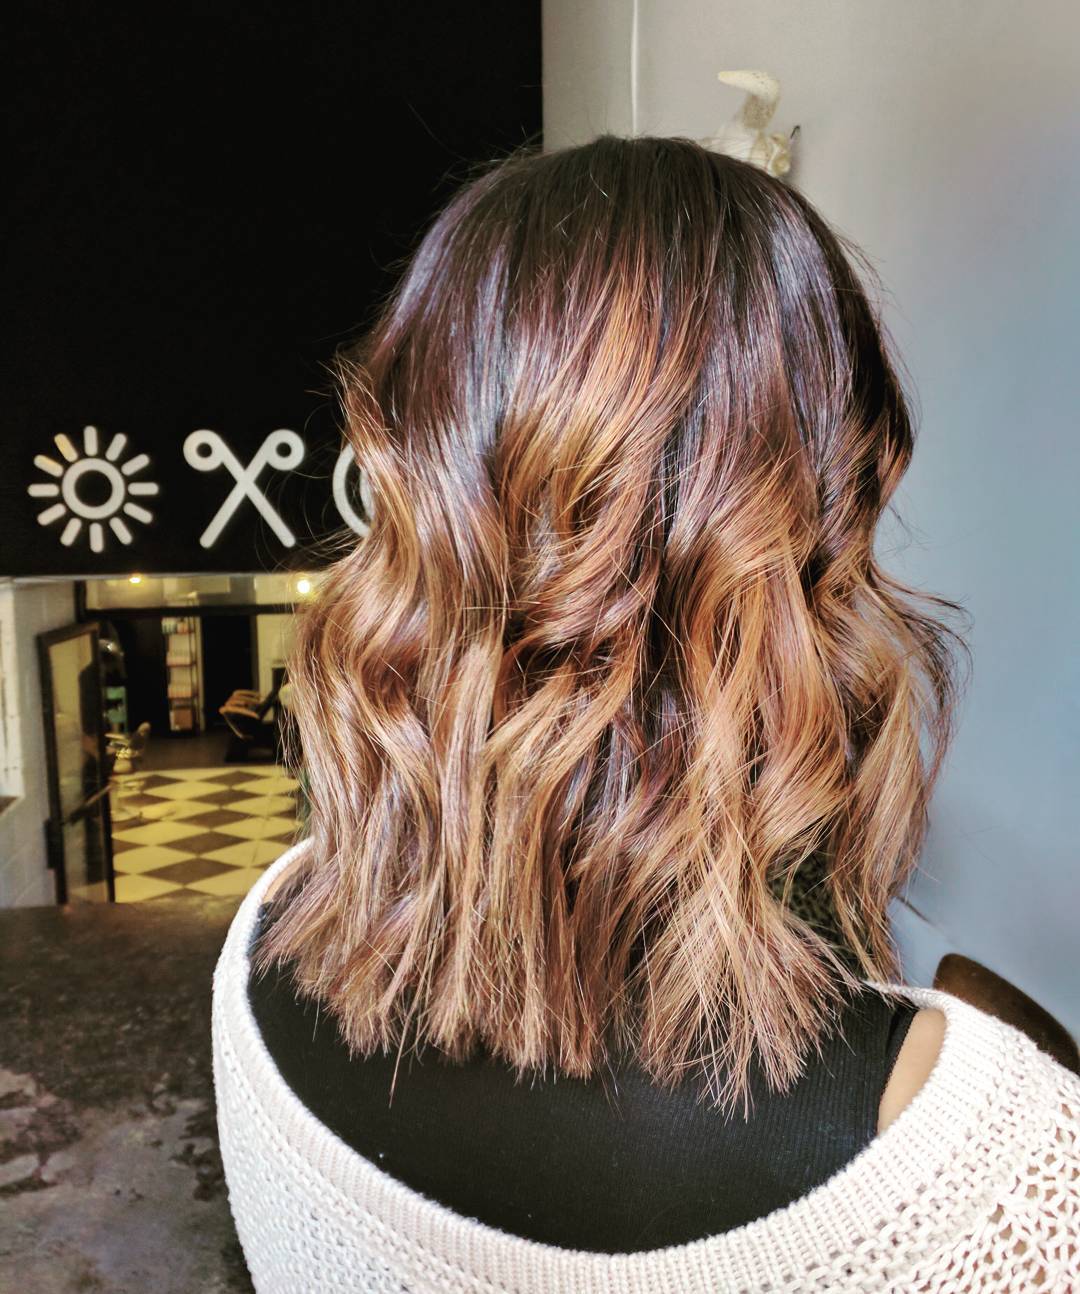 Ombre on Short and Long Bob Hair 2018